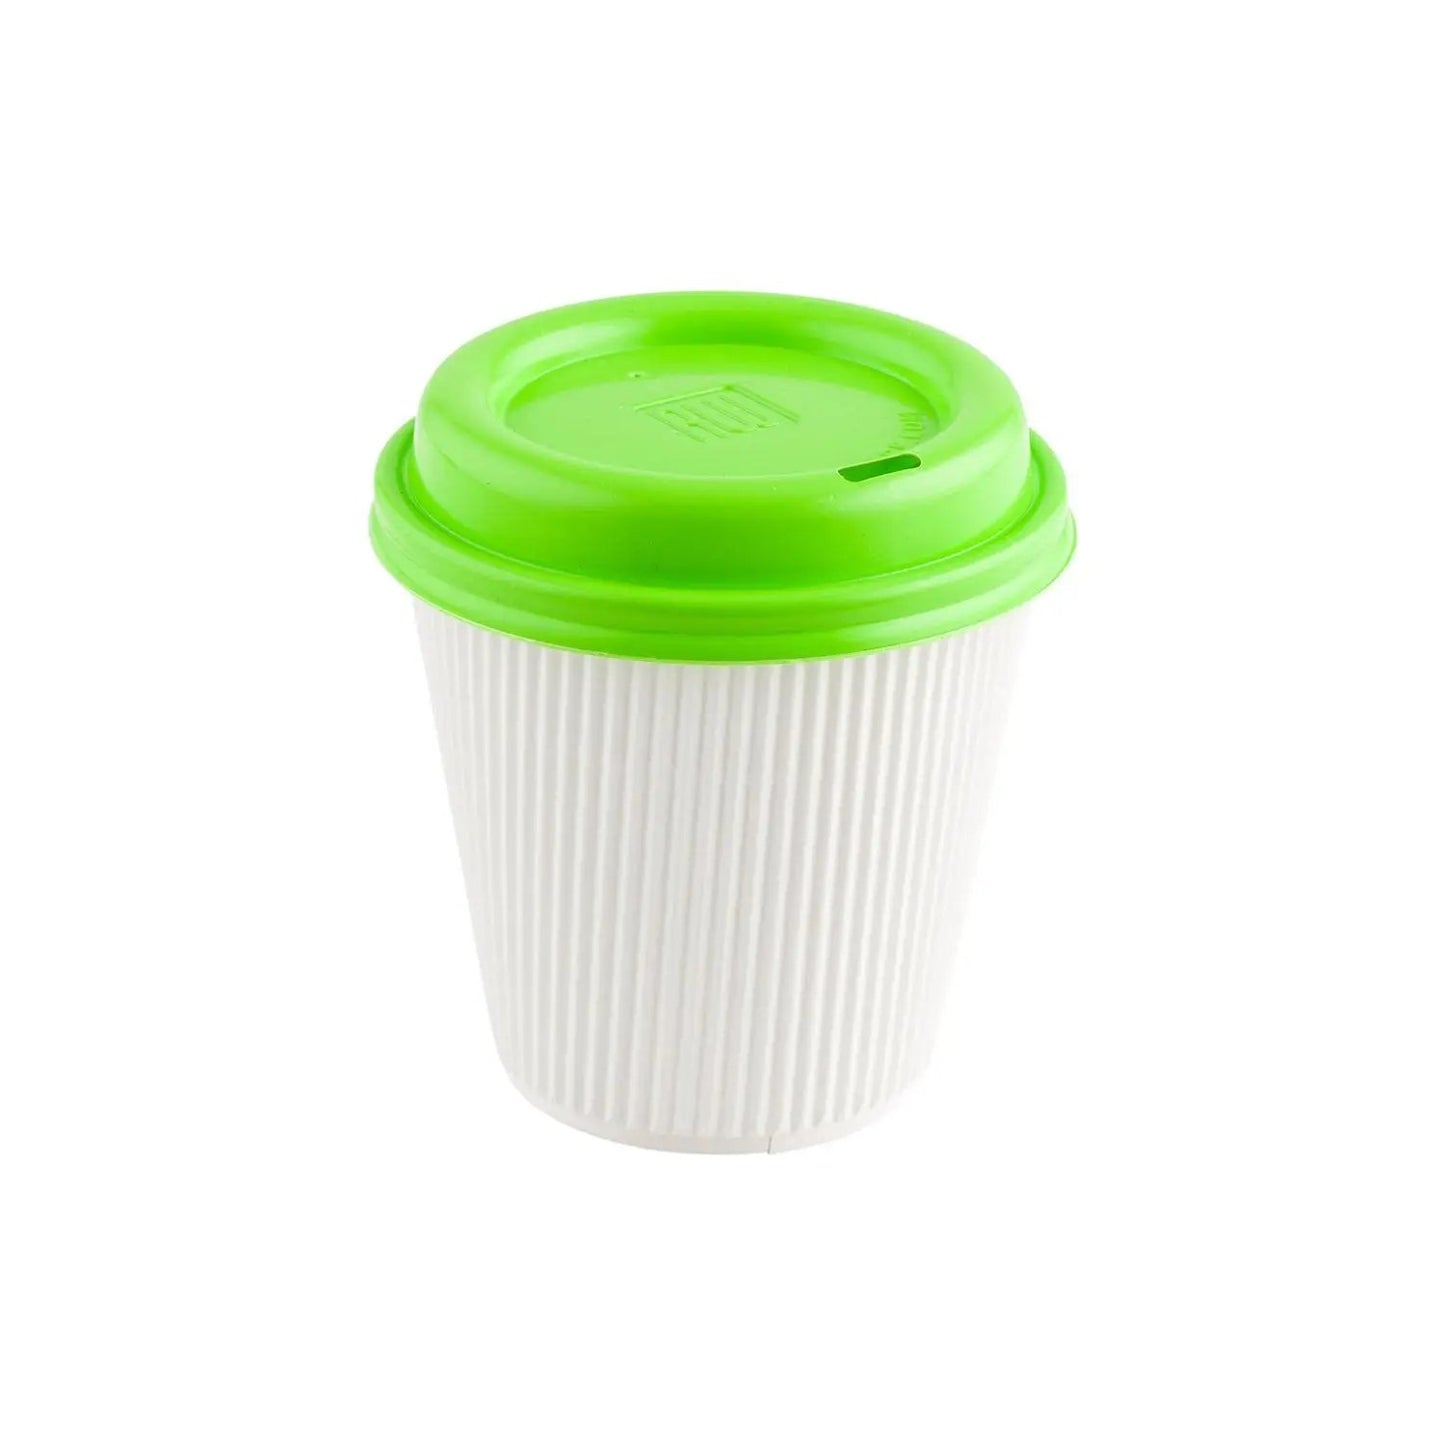 Restpresso Lime Green Plastic Coffee Cup Lid - Fits 8, 12, 16 and 20 oz - 500 count box - www.ecoware.ae                               